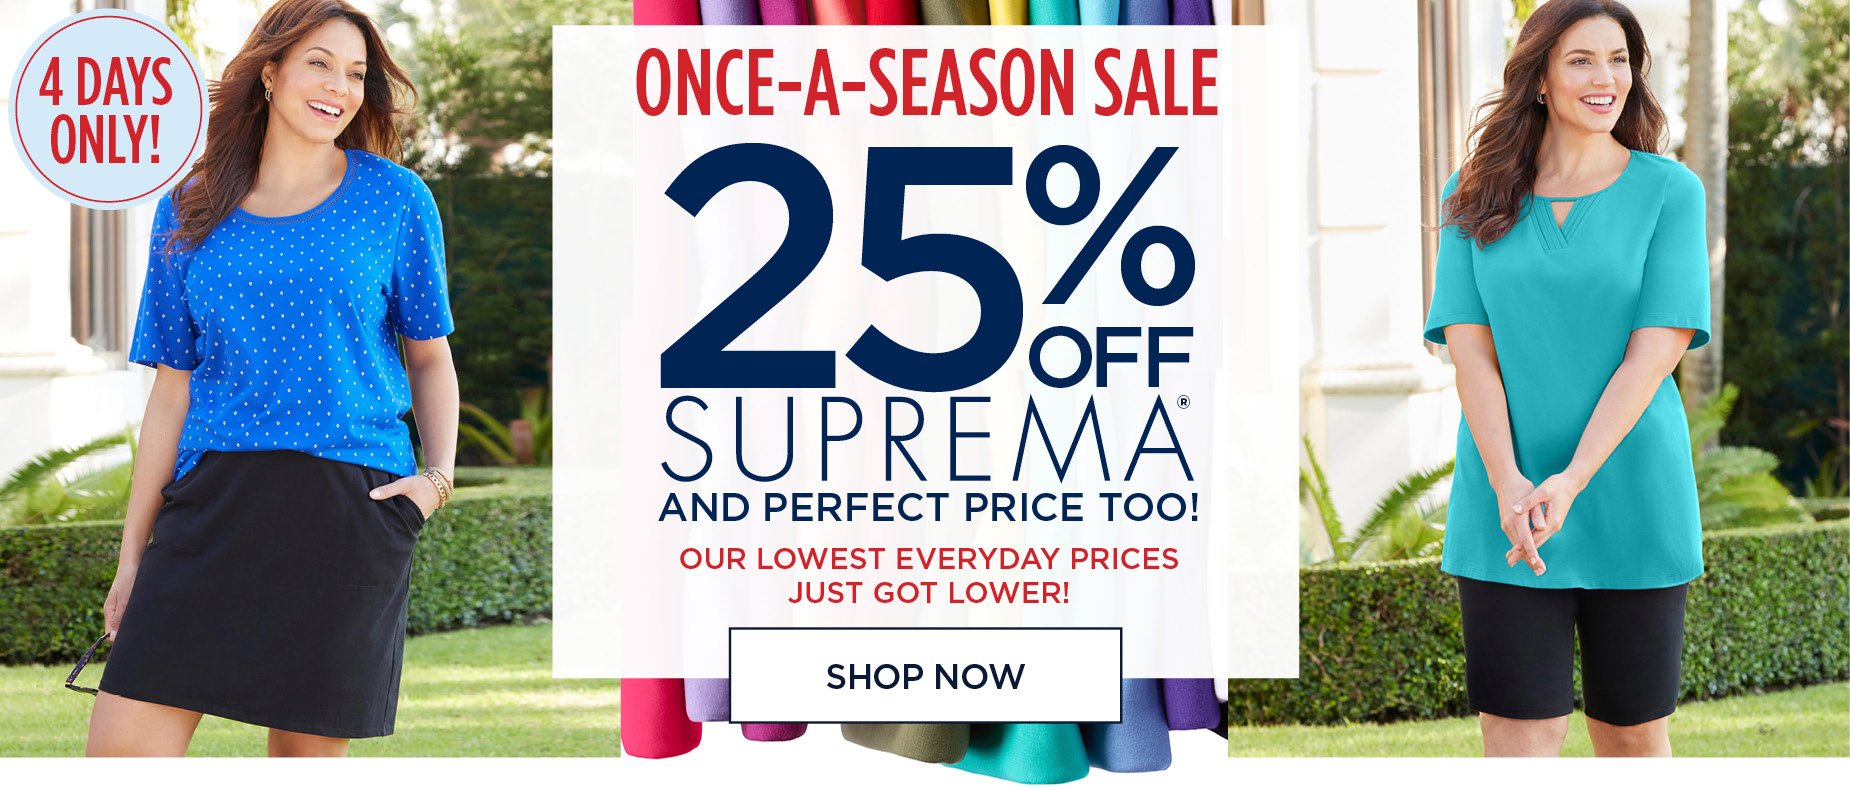 ONCE-A-SEASON SALE: 25% OFF SUMPREMA - 4 DAYS ONLY